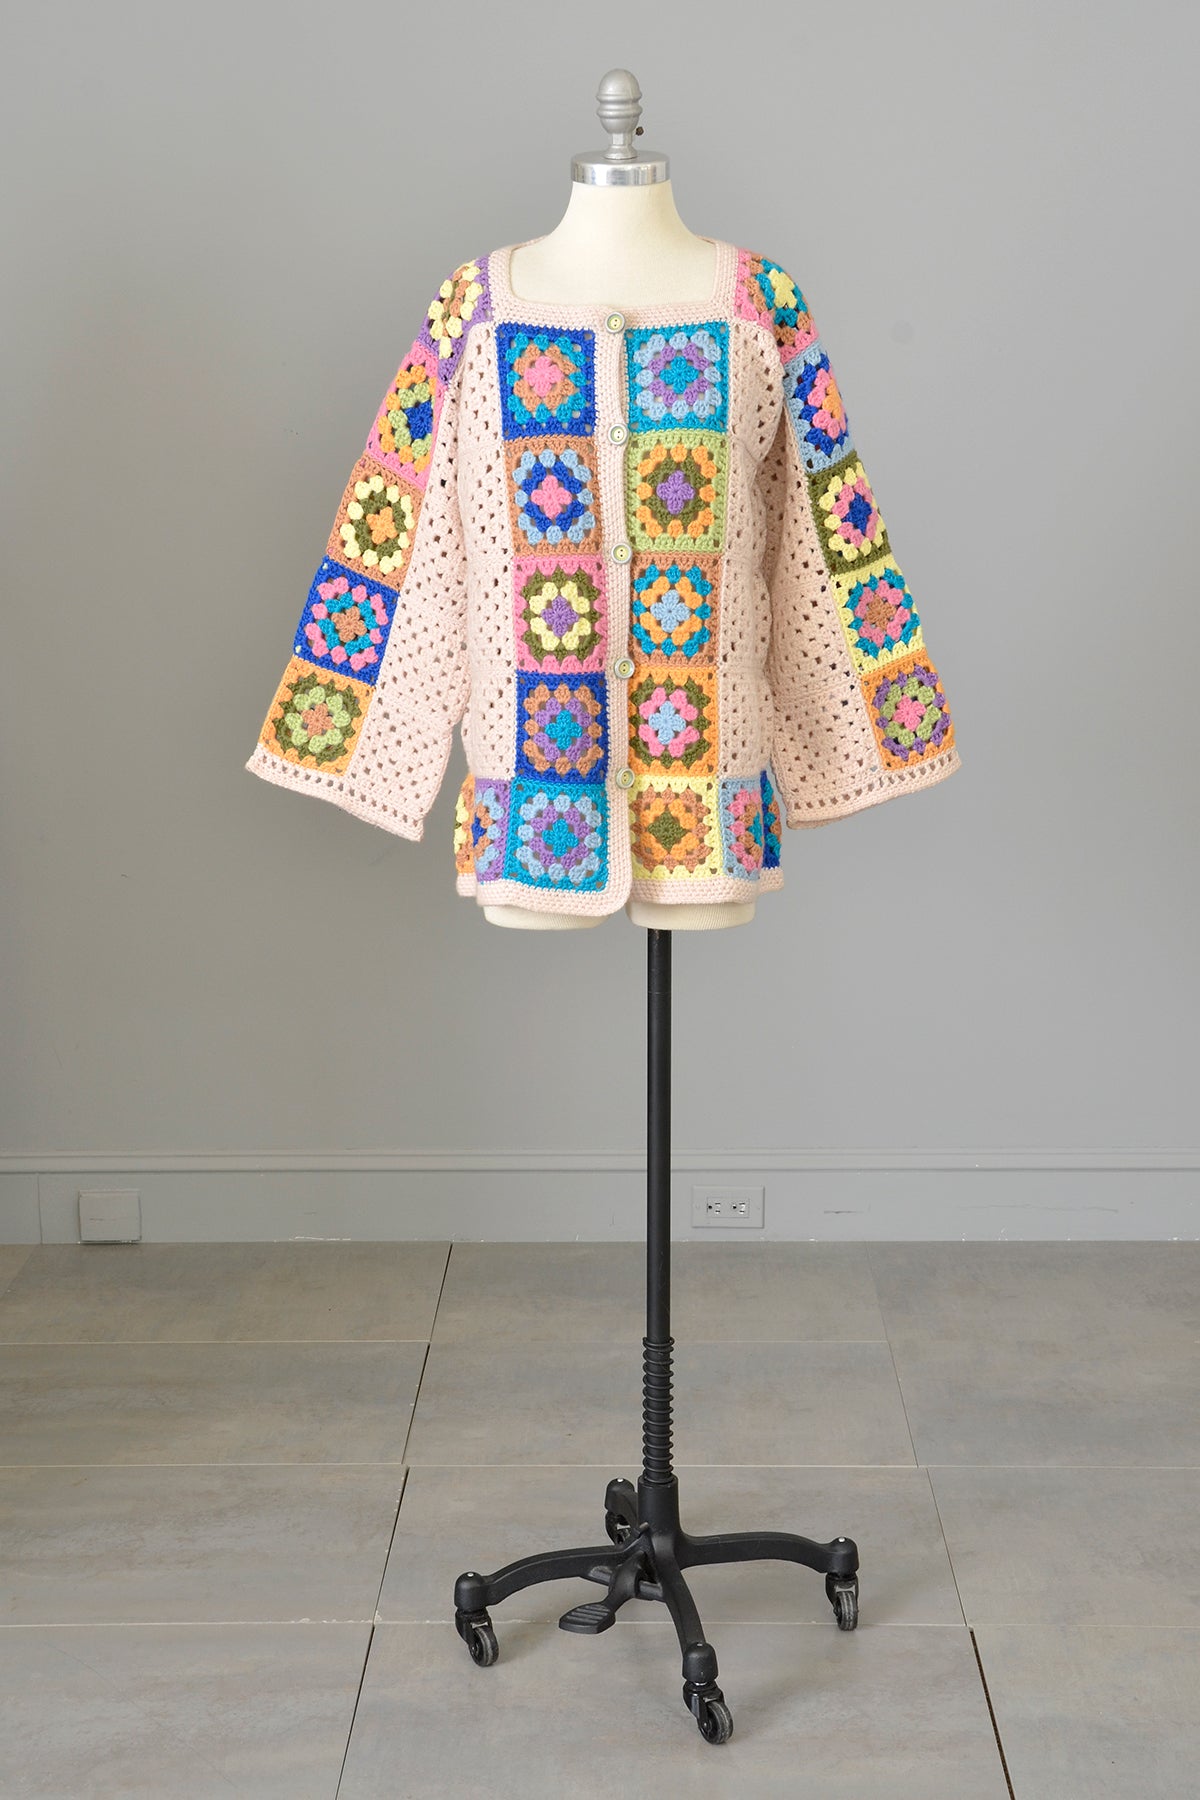 Vintage Hand Knit Crochet Patchwork Granny Squares Cardigan Sweater